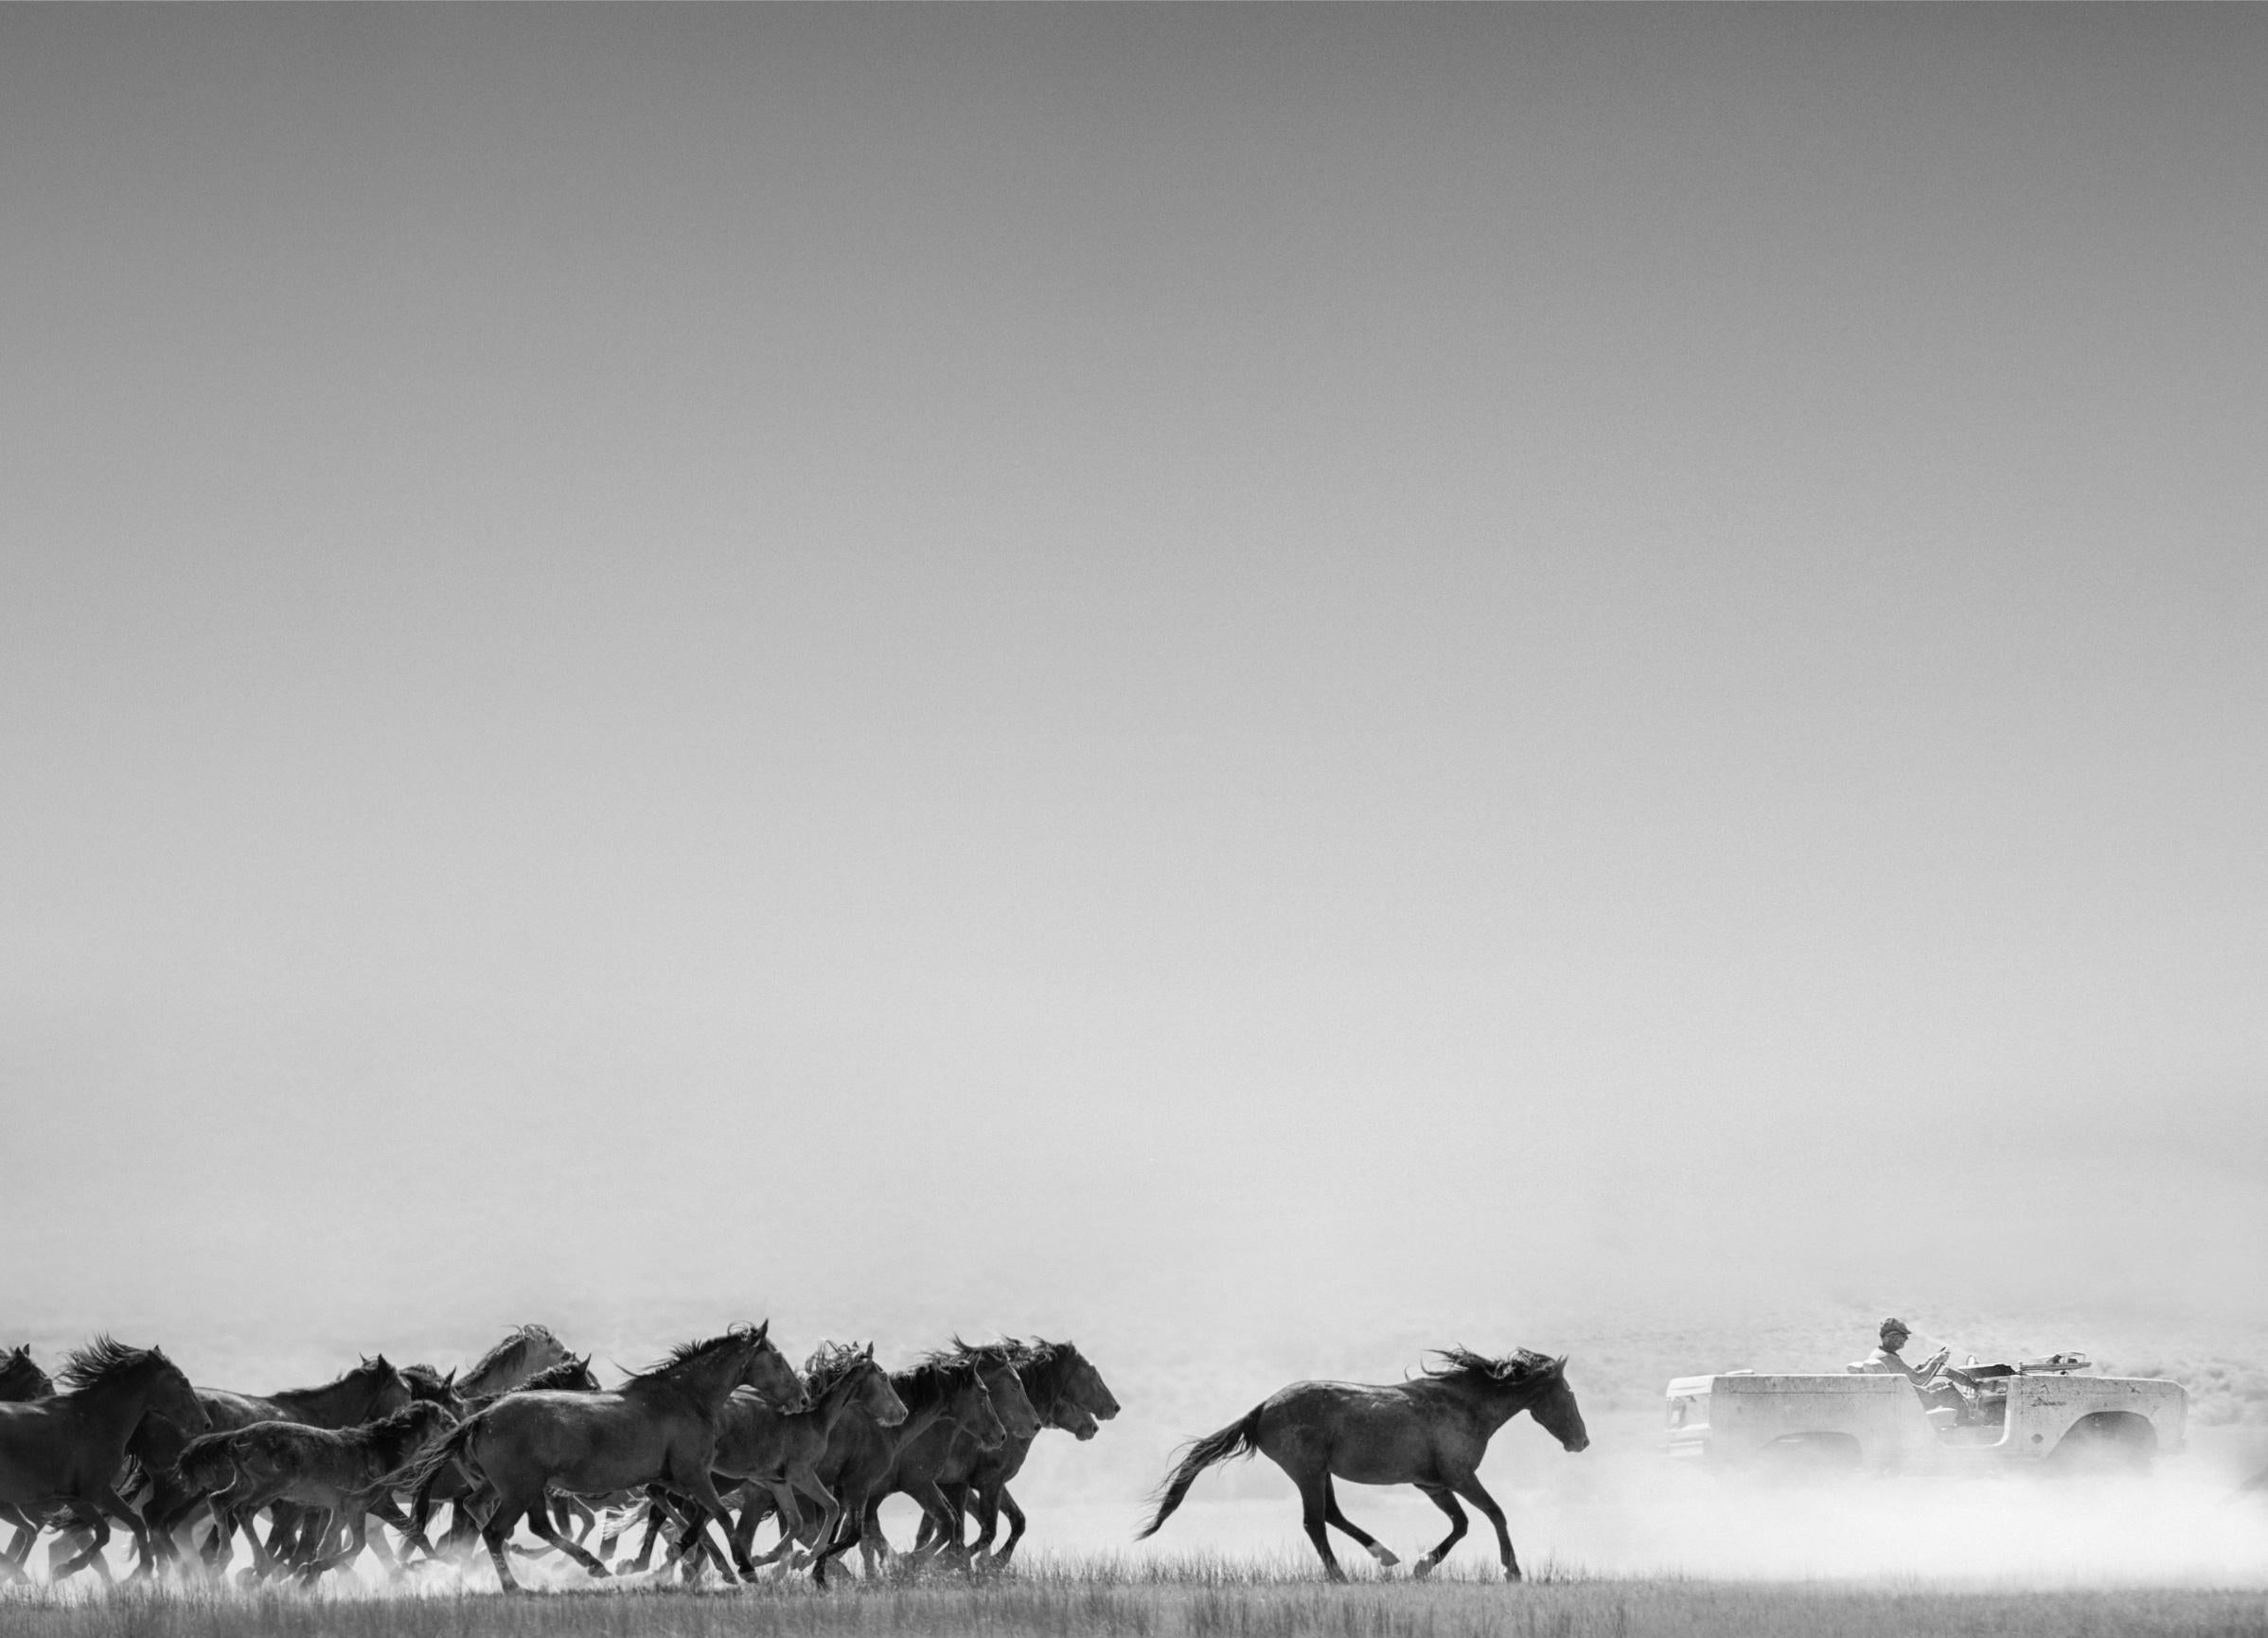 Shane Russeck Black and White Photograph - AMERICAN HORSE POWER 36x48 Photography Wild Horses Mustangs FORD BRONCO ICON